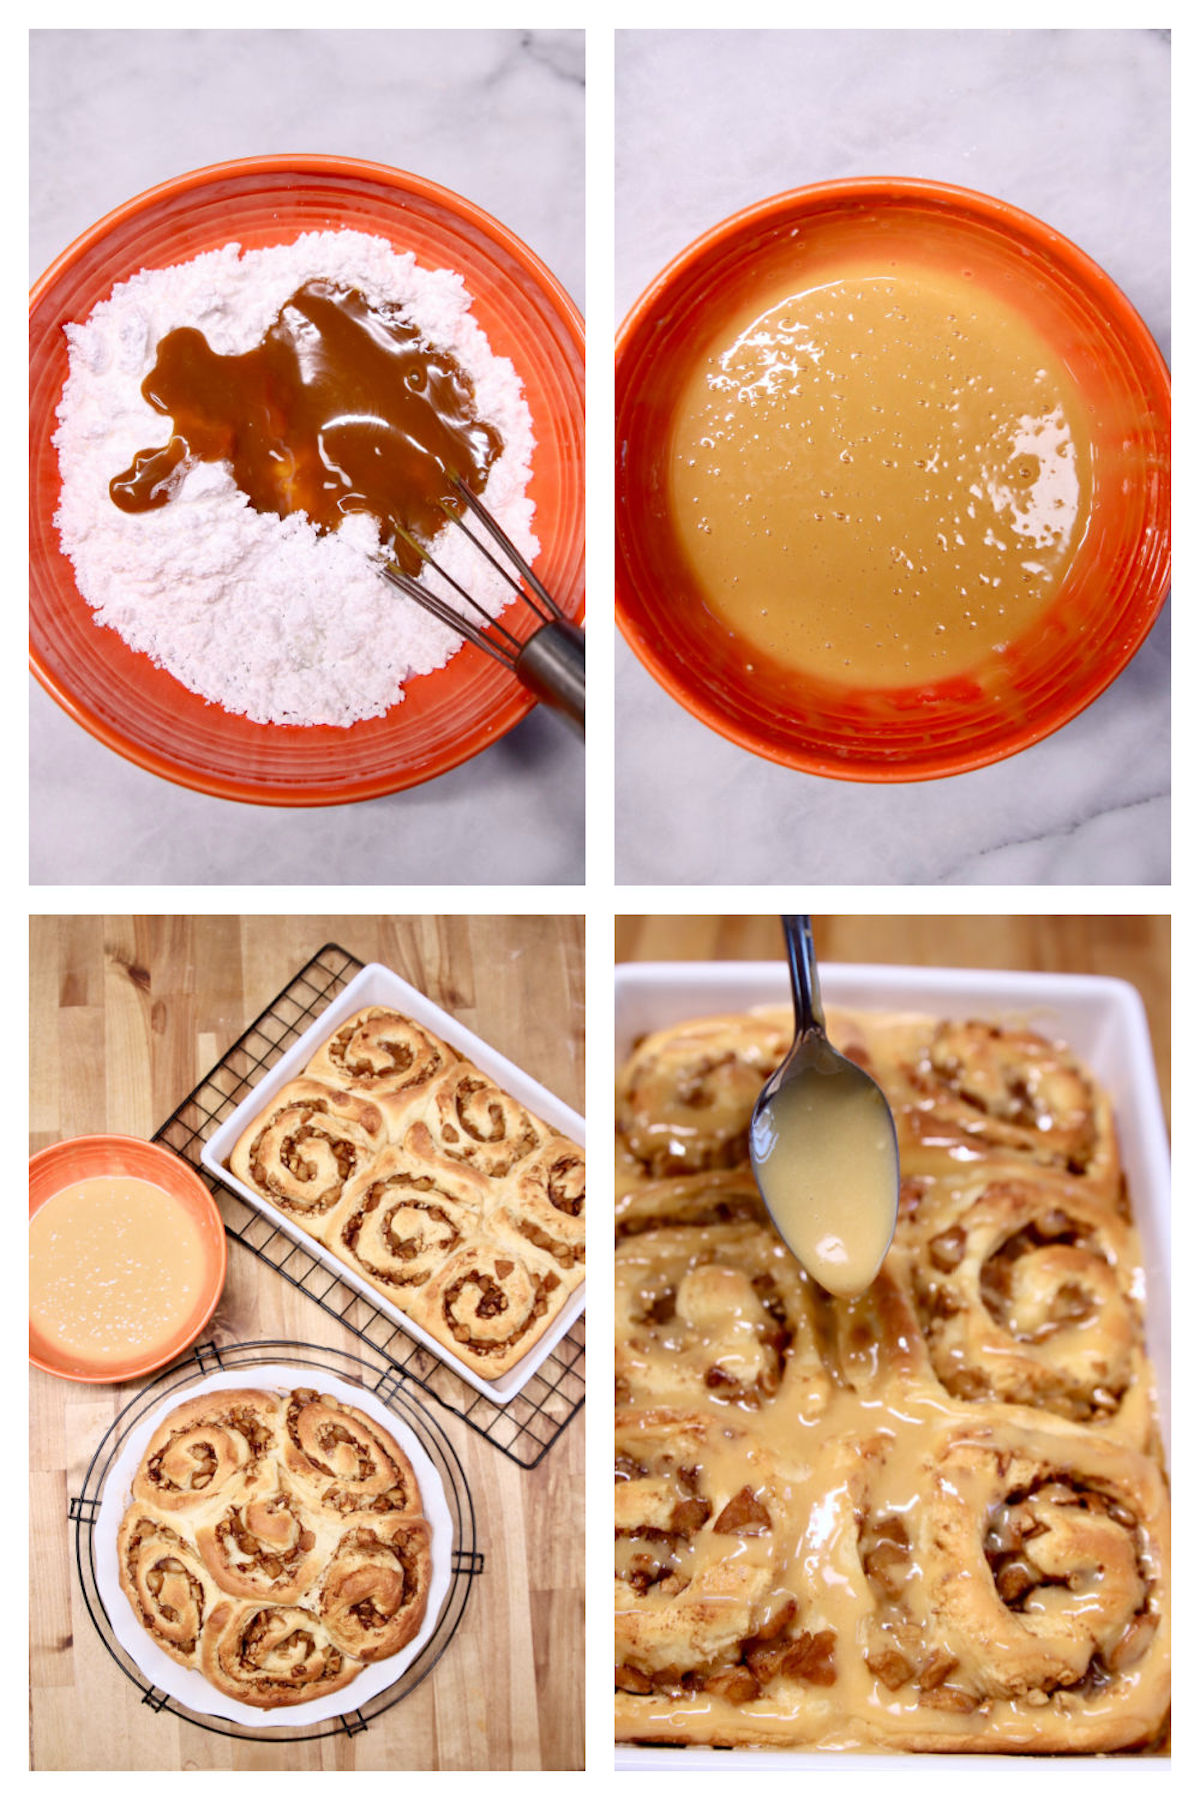 making caramel icing, drizzling over baked cinnamon rolls